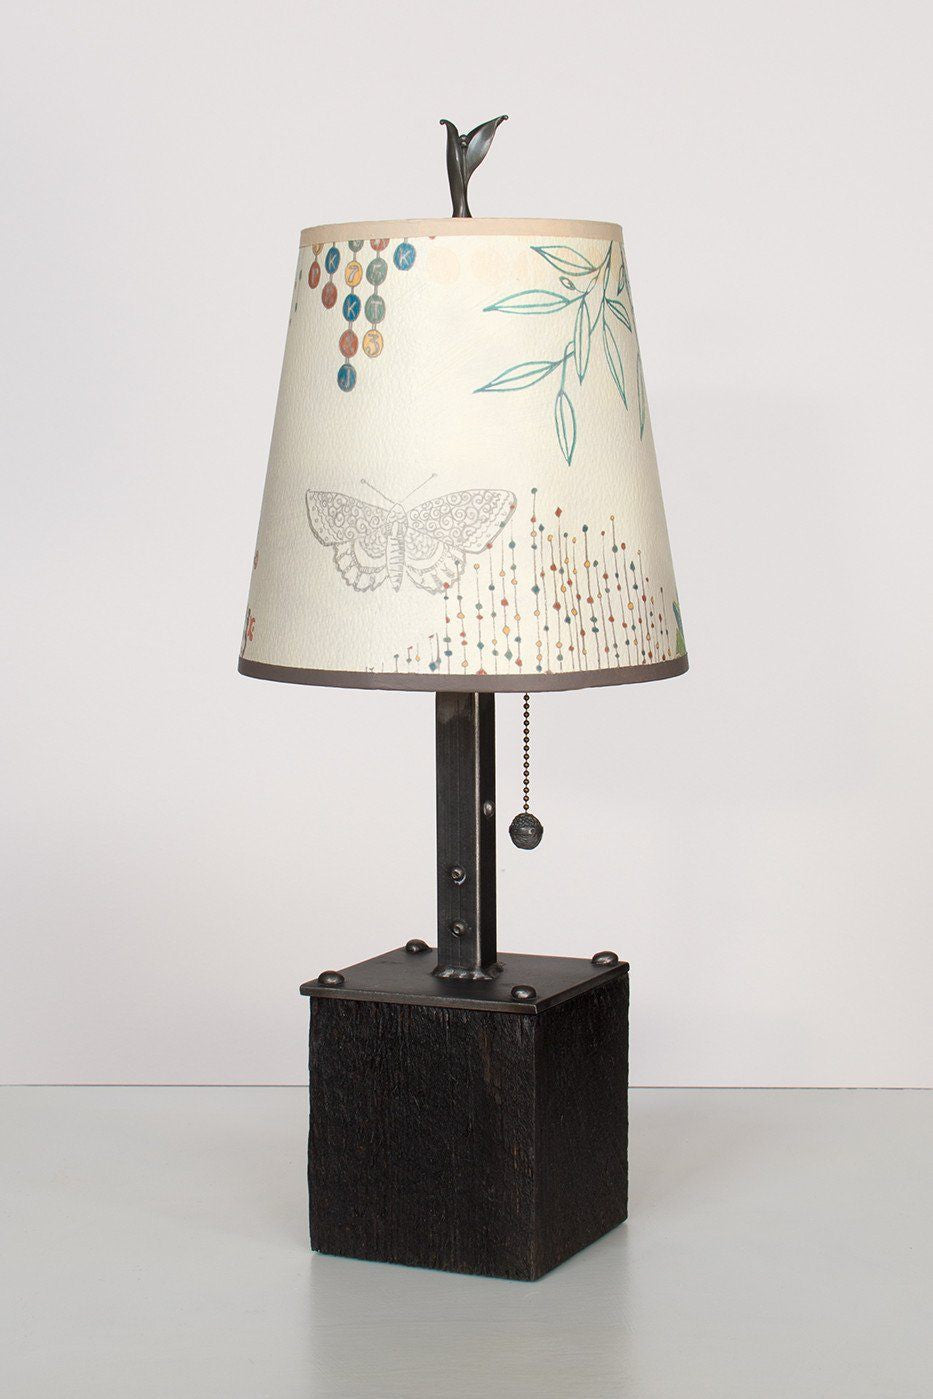 Janna Ugone & Co Table Lamps Steel Table Lamp on Reclaimed Wood with Small Drum Shade in Ecru Journey